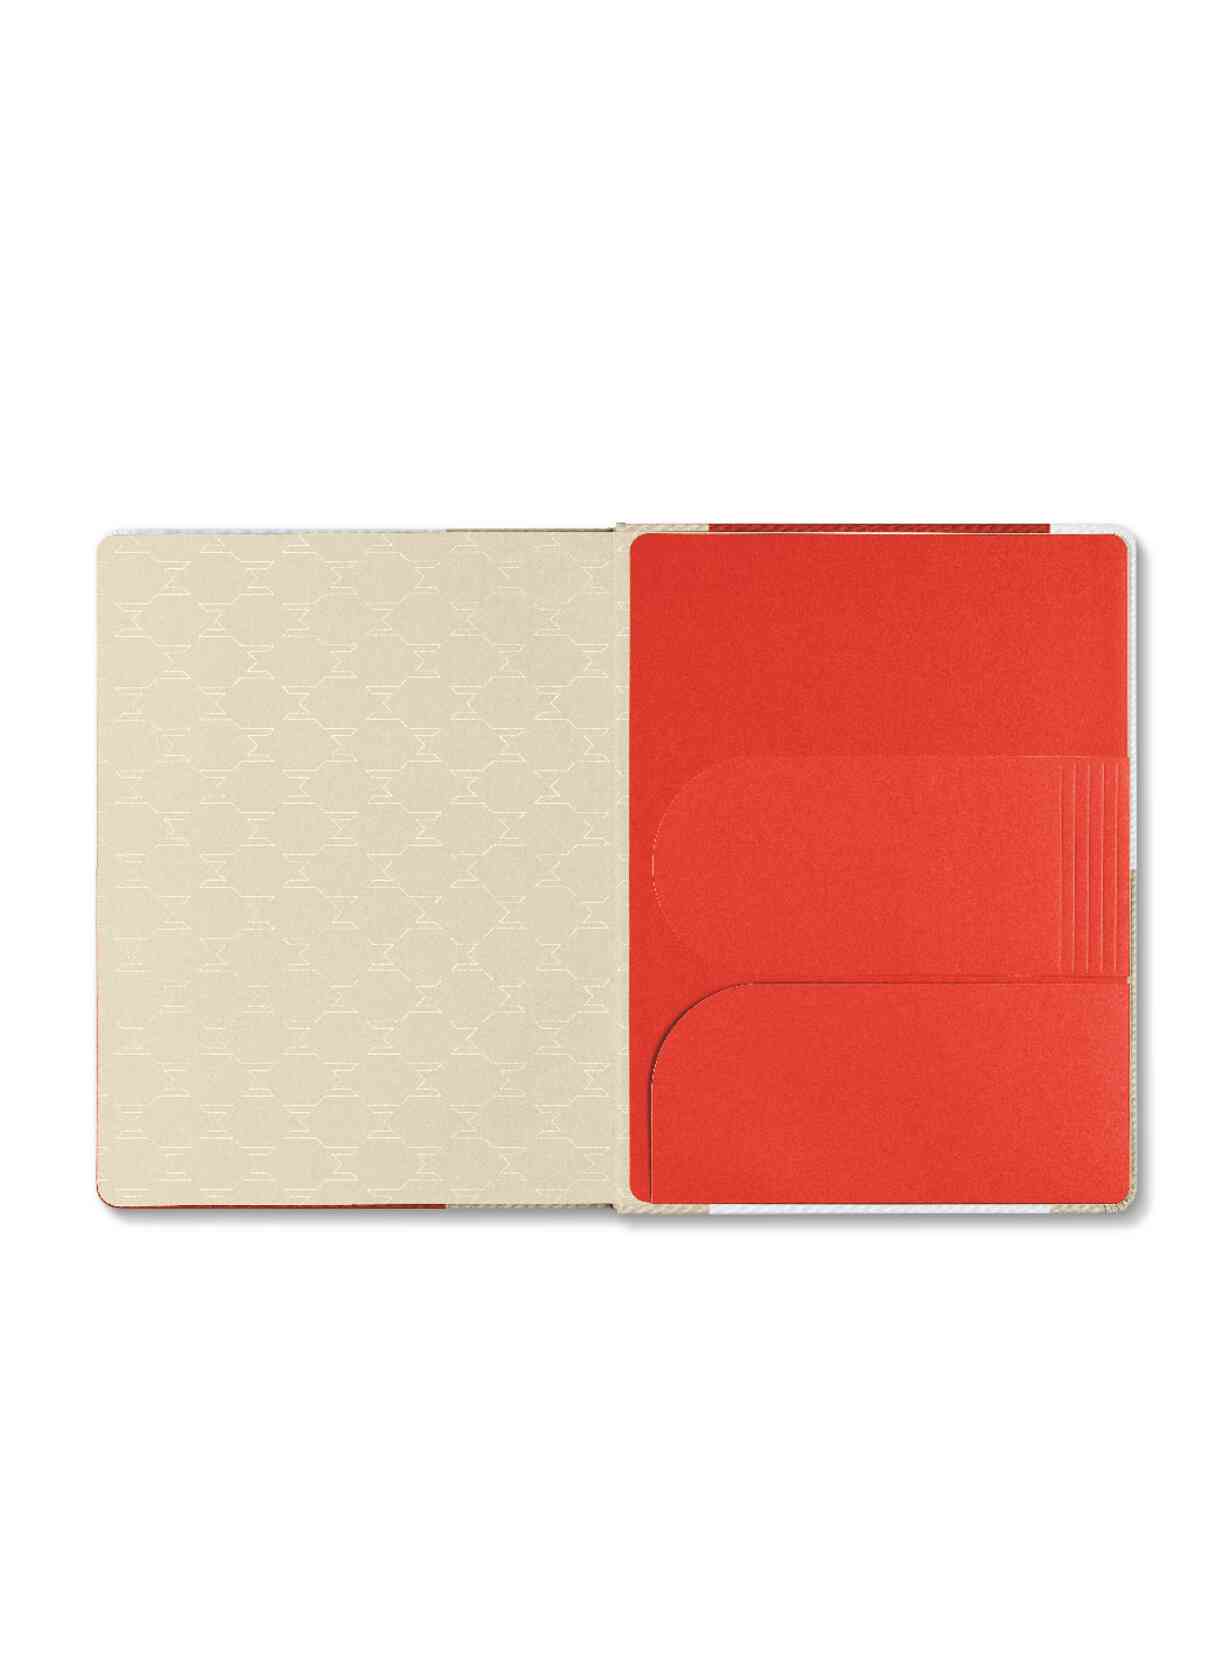 MINI Car Tile Notebook Red